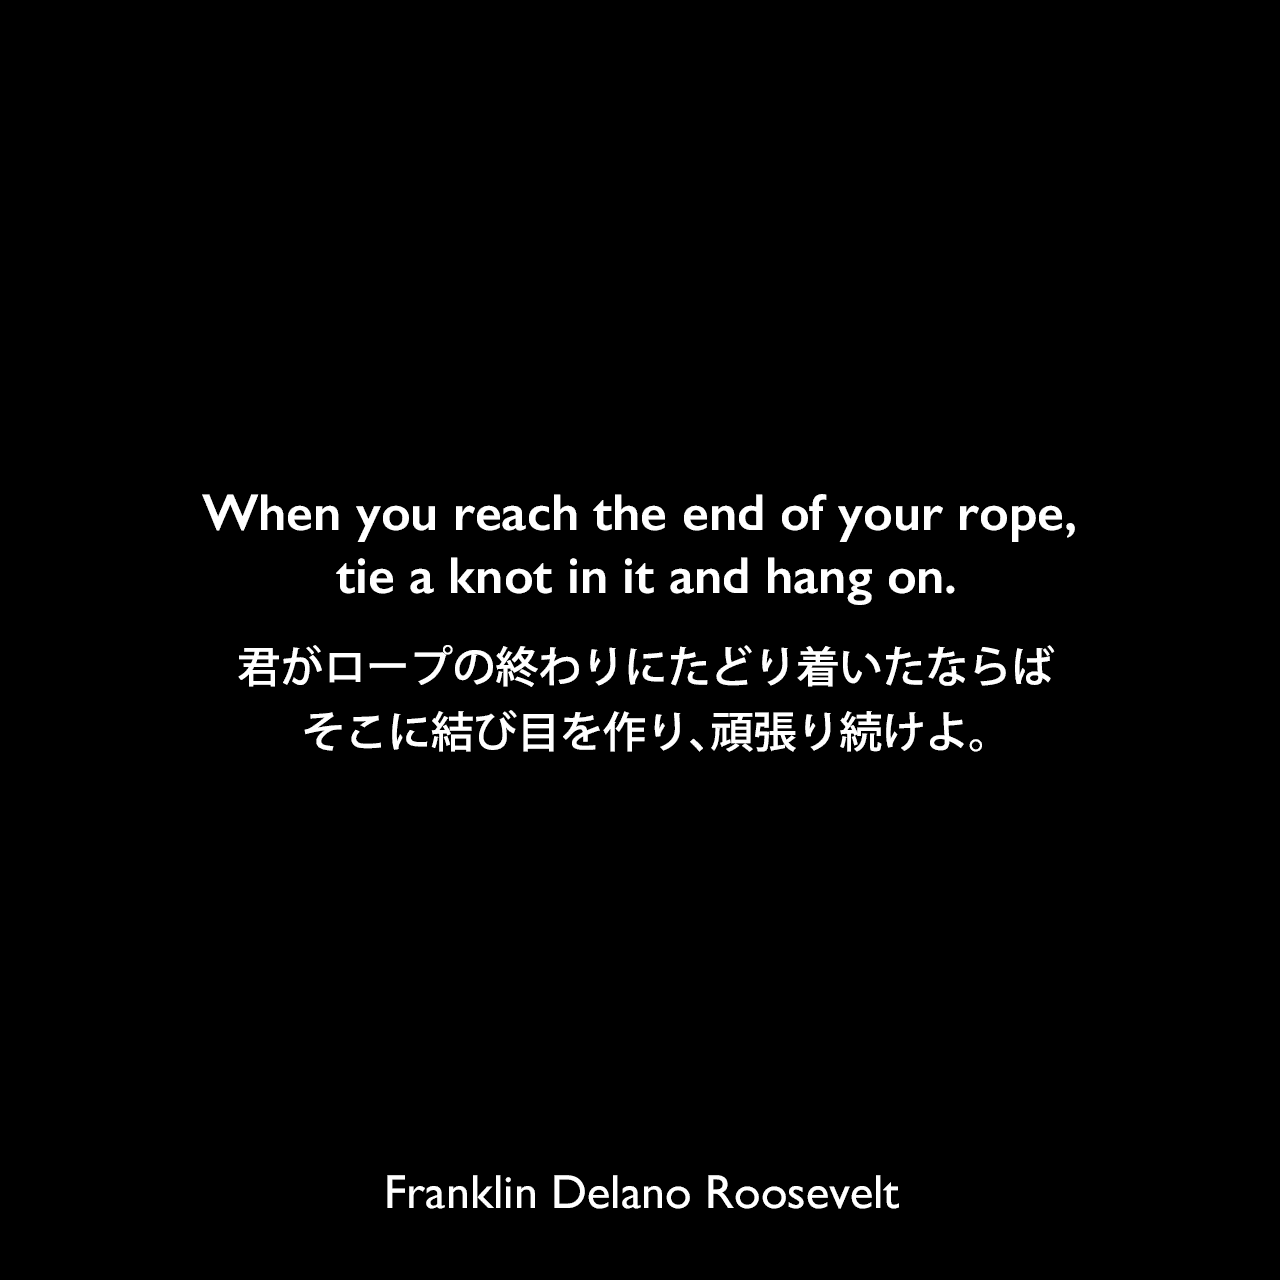 When you reach the end of your rope, tie a knot in it and hang on.君がロープの終わりにたどり着いたならば、そこに結び目を作り、頑張り続けよ。Franklin Delano Roosevelt